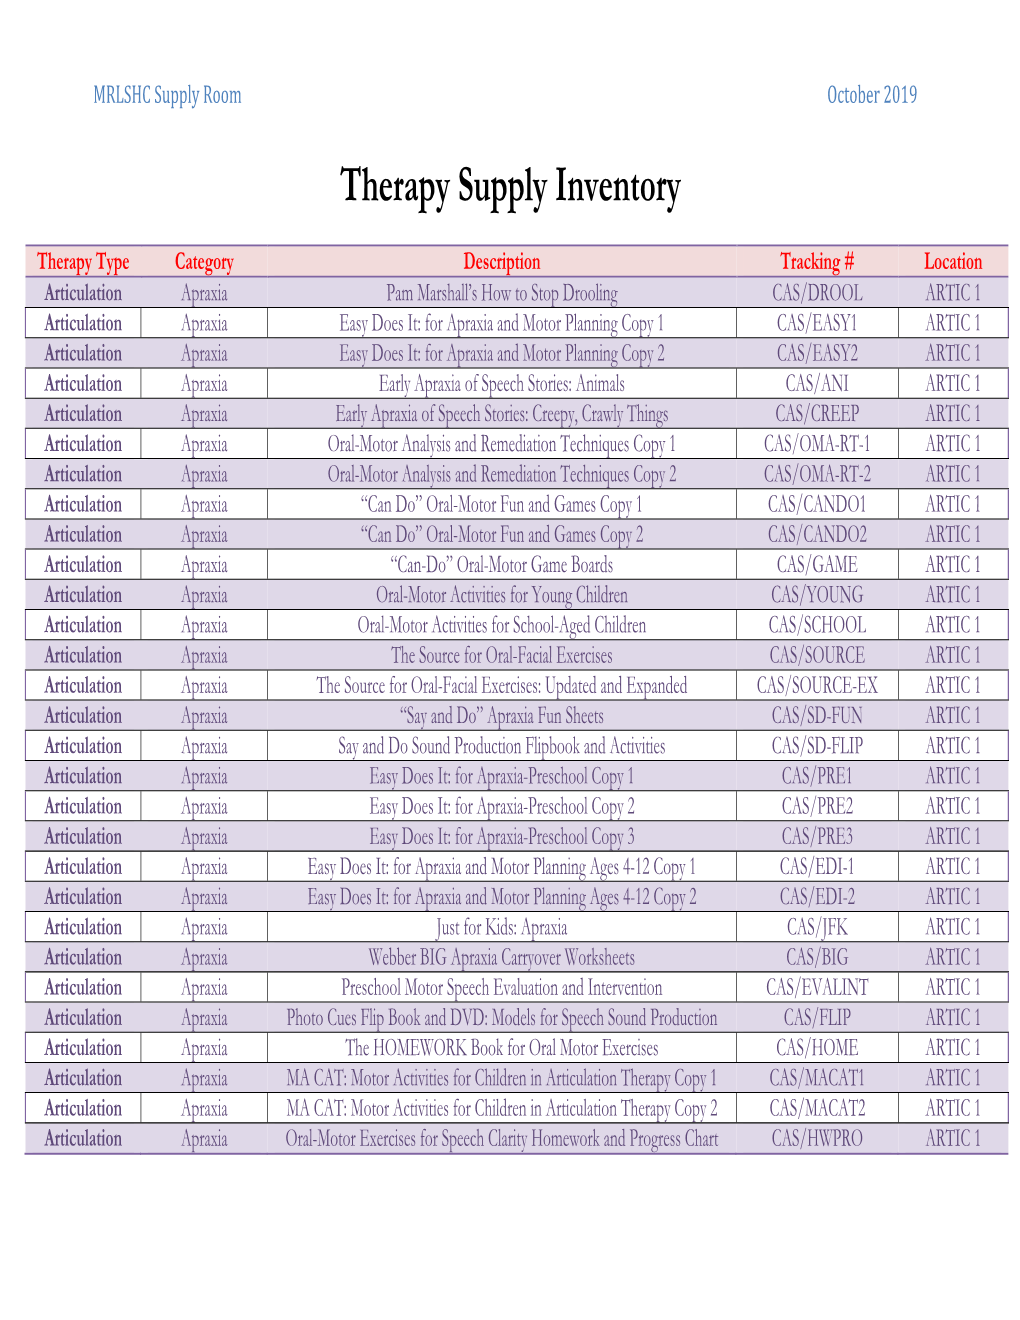 Therapy Supply Inventory